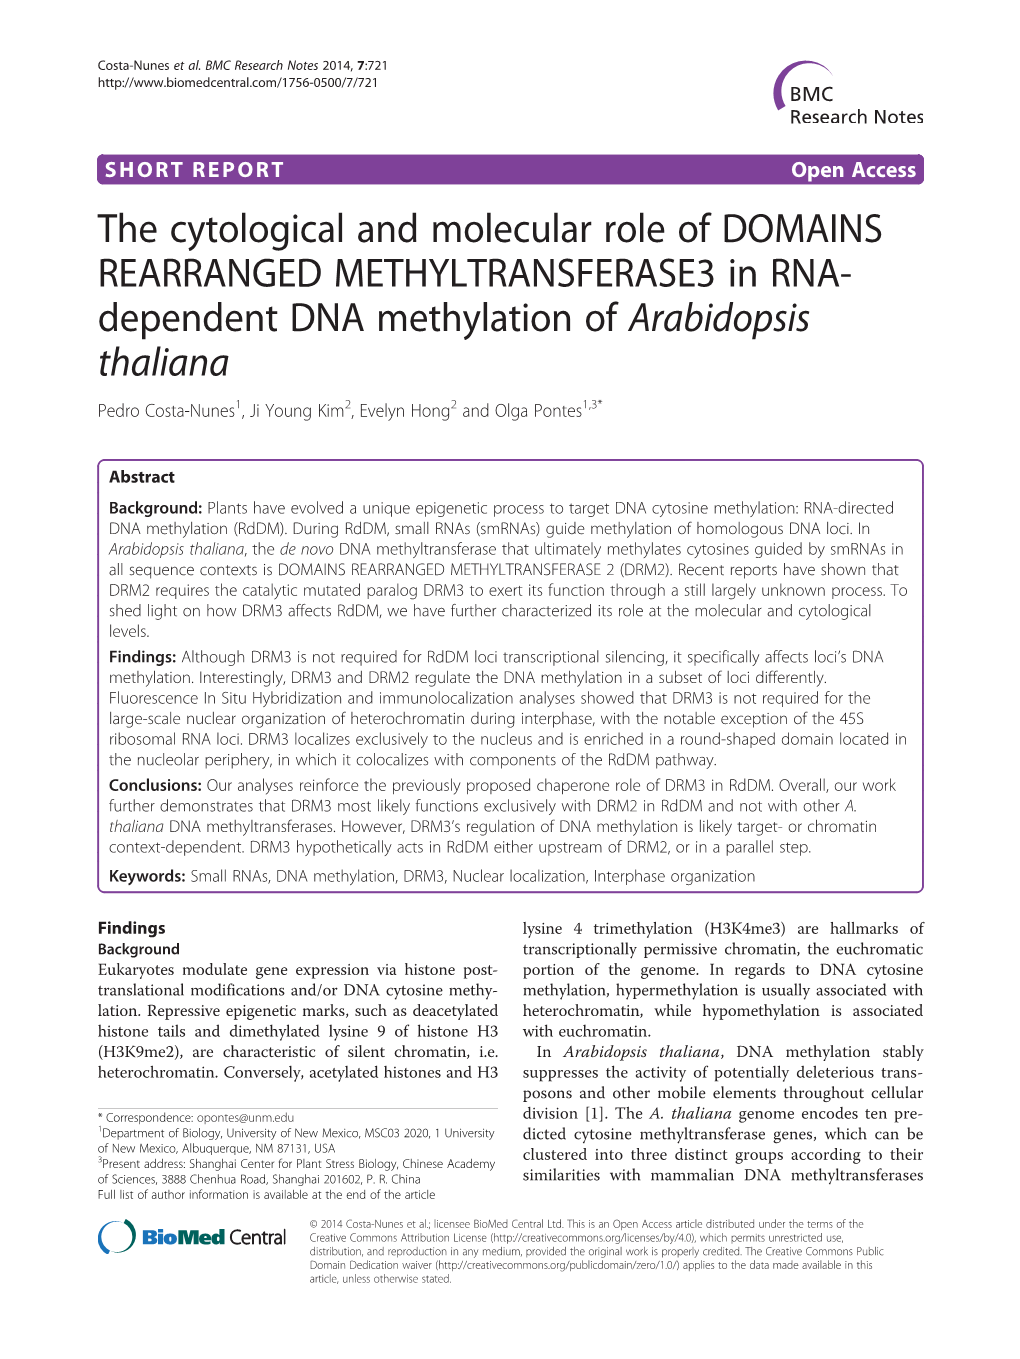 The Cytological and Molecular Role of DOMAINS REARRANGED METHYLTRANSFERASE3 in RNA- Dependent DNA Methylation of Arabidopsis Thaliana